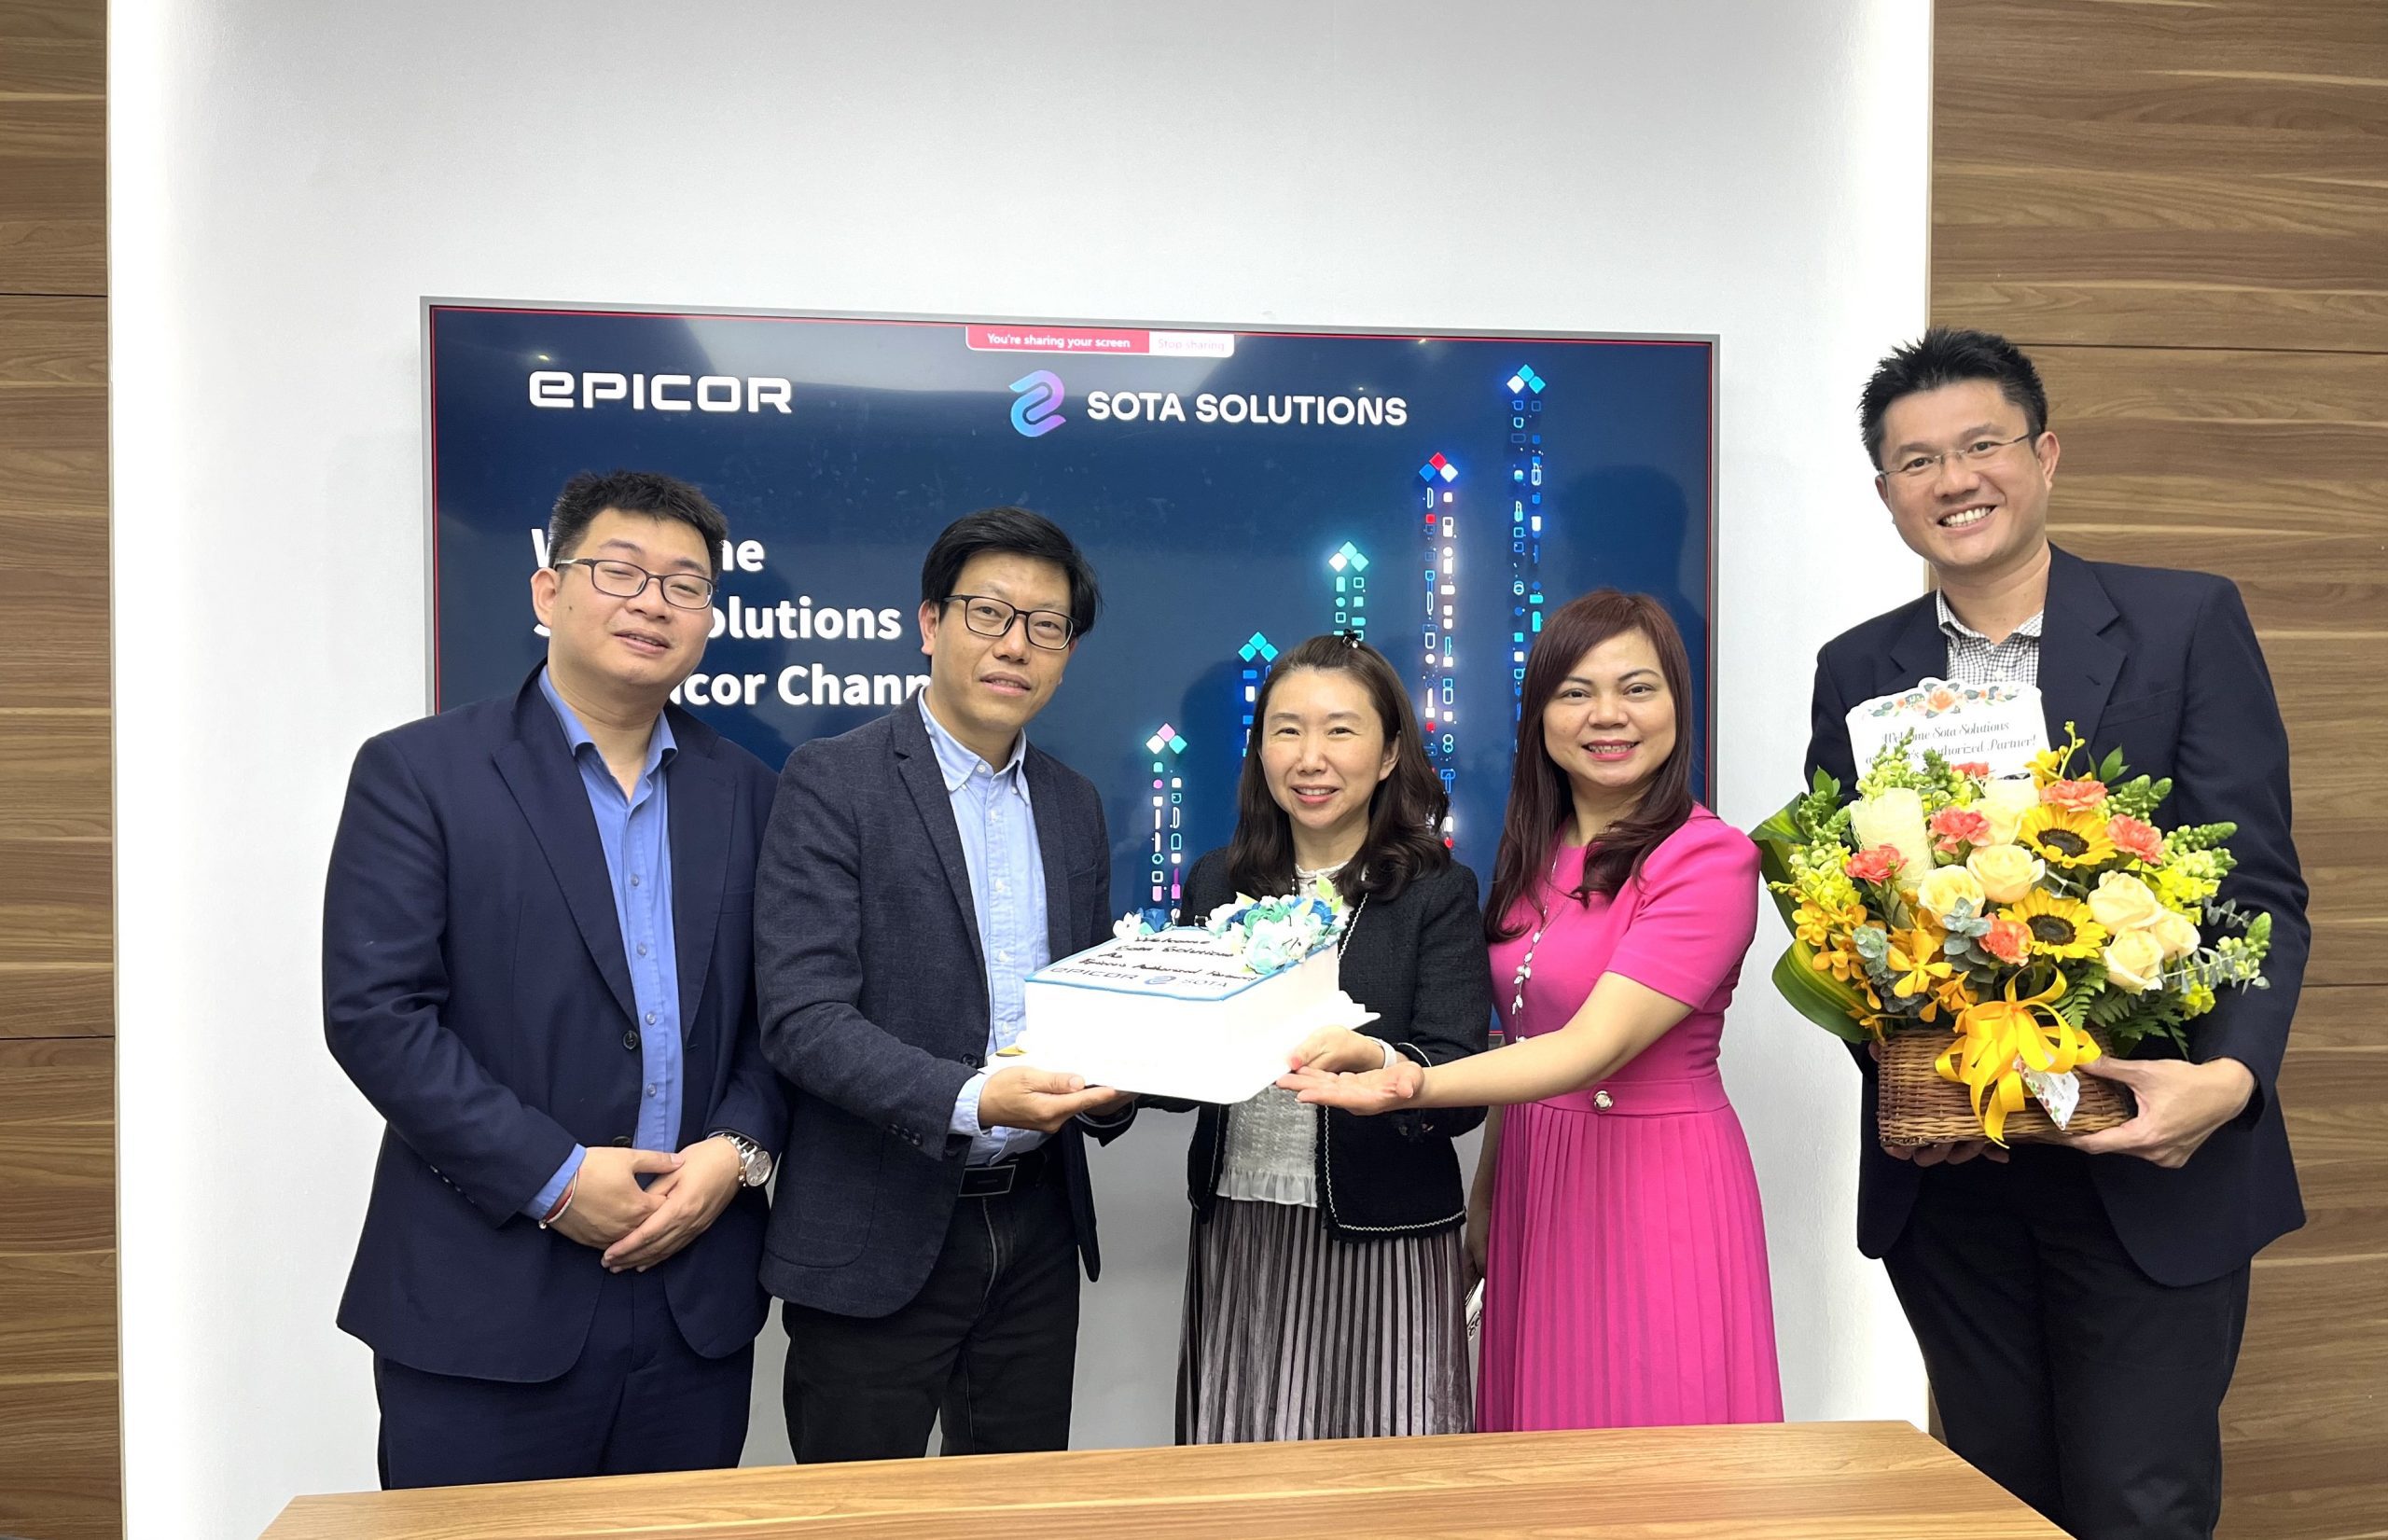 Key representatives from Epicor and Sota Solutions